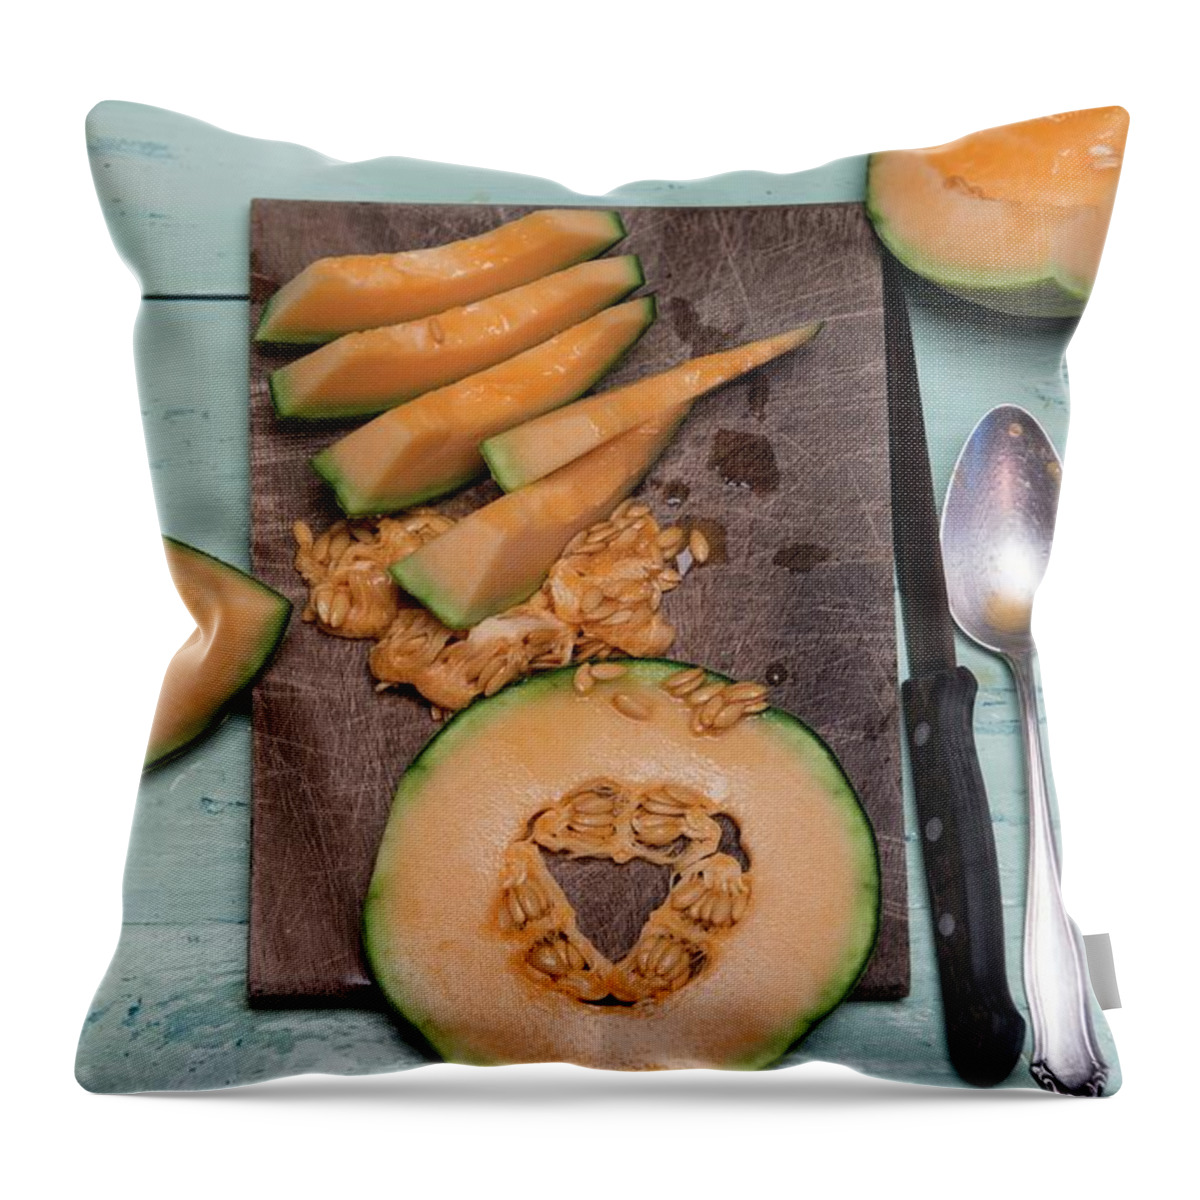 Ip_11434498 Throw Pillow featuring the photograph Slices Of Cantaloupe Melon On A Wooden Board by Angelika Grossmann